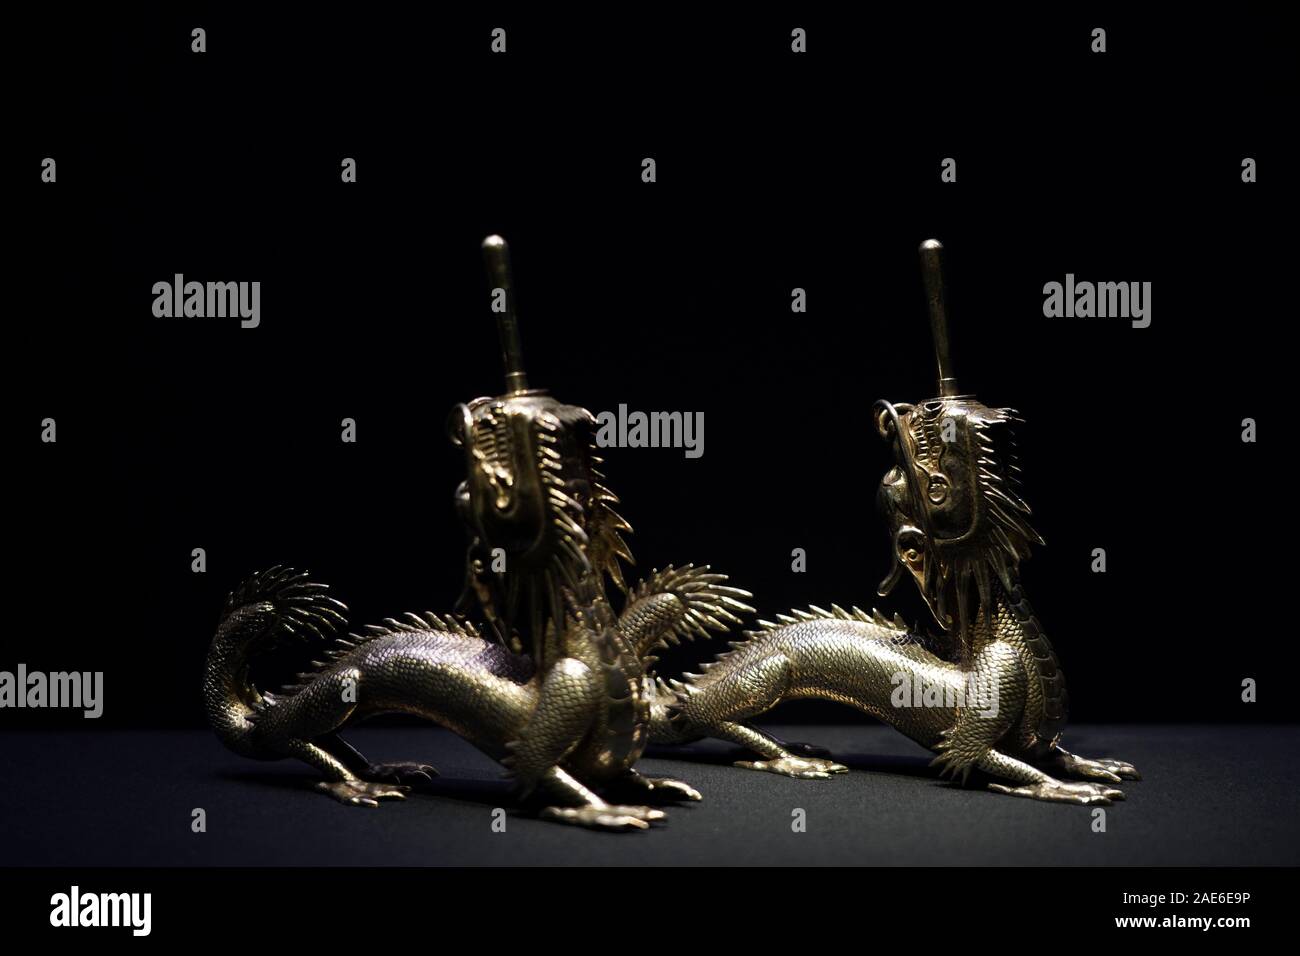 Xi'an, China's Shaanxi Province. 6th Dec, 2019. Silver dragon-shaped wares made in China and exported overseas from late Qing Dynasty (1644-1911) to 1949 are displayed during an exhibition held at Xi'an Museum in Xi'an, capital city of northwest China's Shaanxi Province, Dec. 6, 2019. Credit: Liu Xiao/Xinhua/Alamy Live News Stock Photo